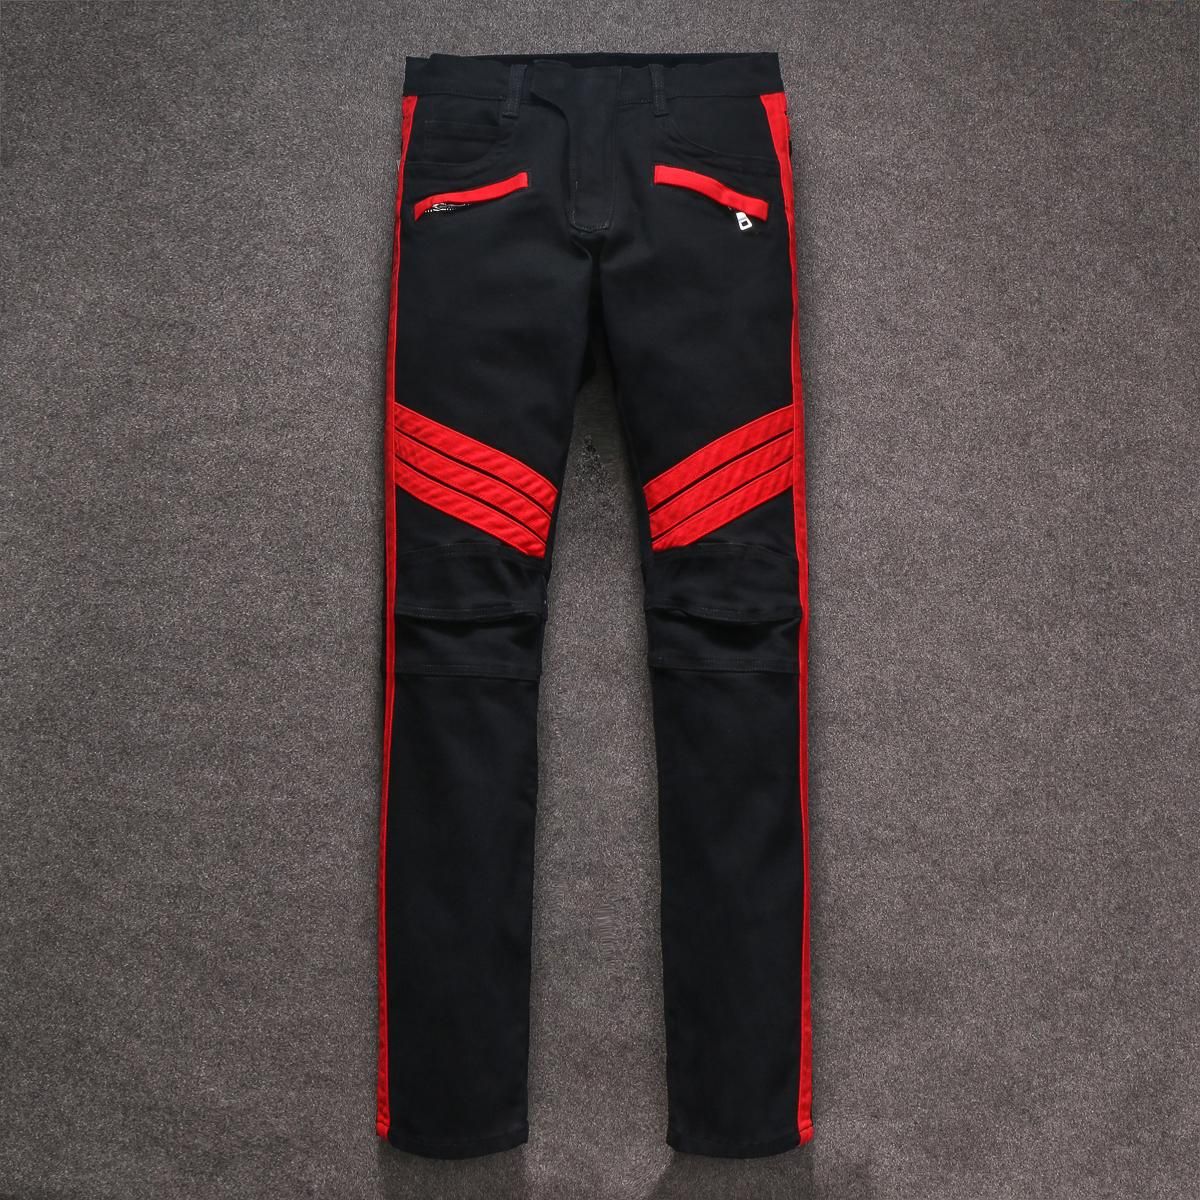 mens black trousers with red stripe